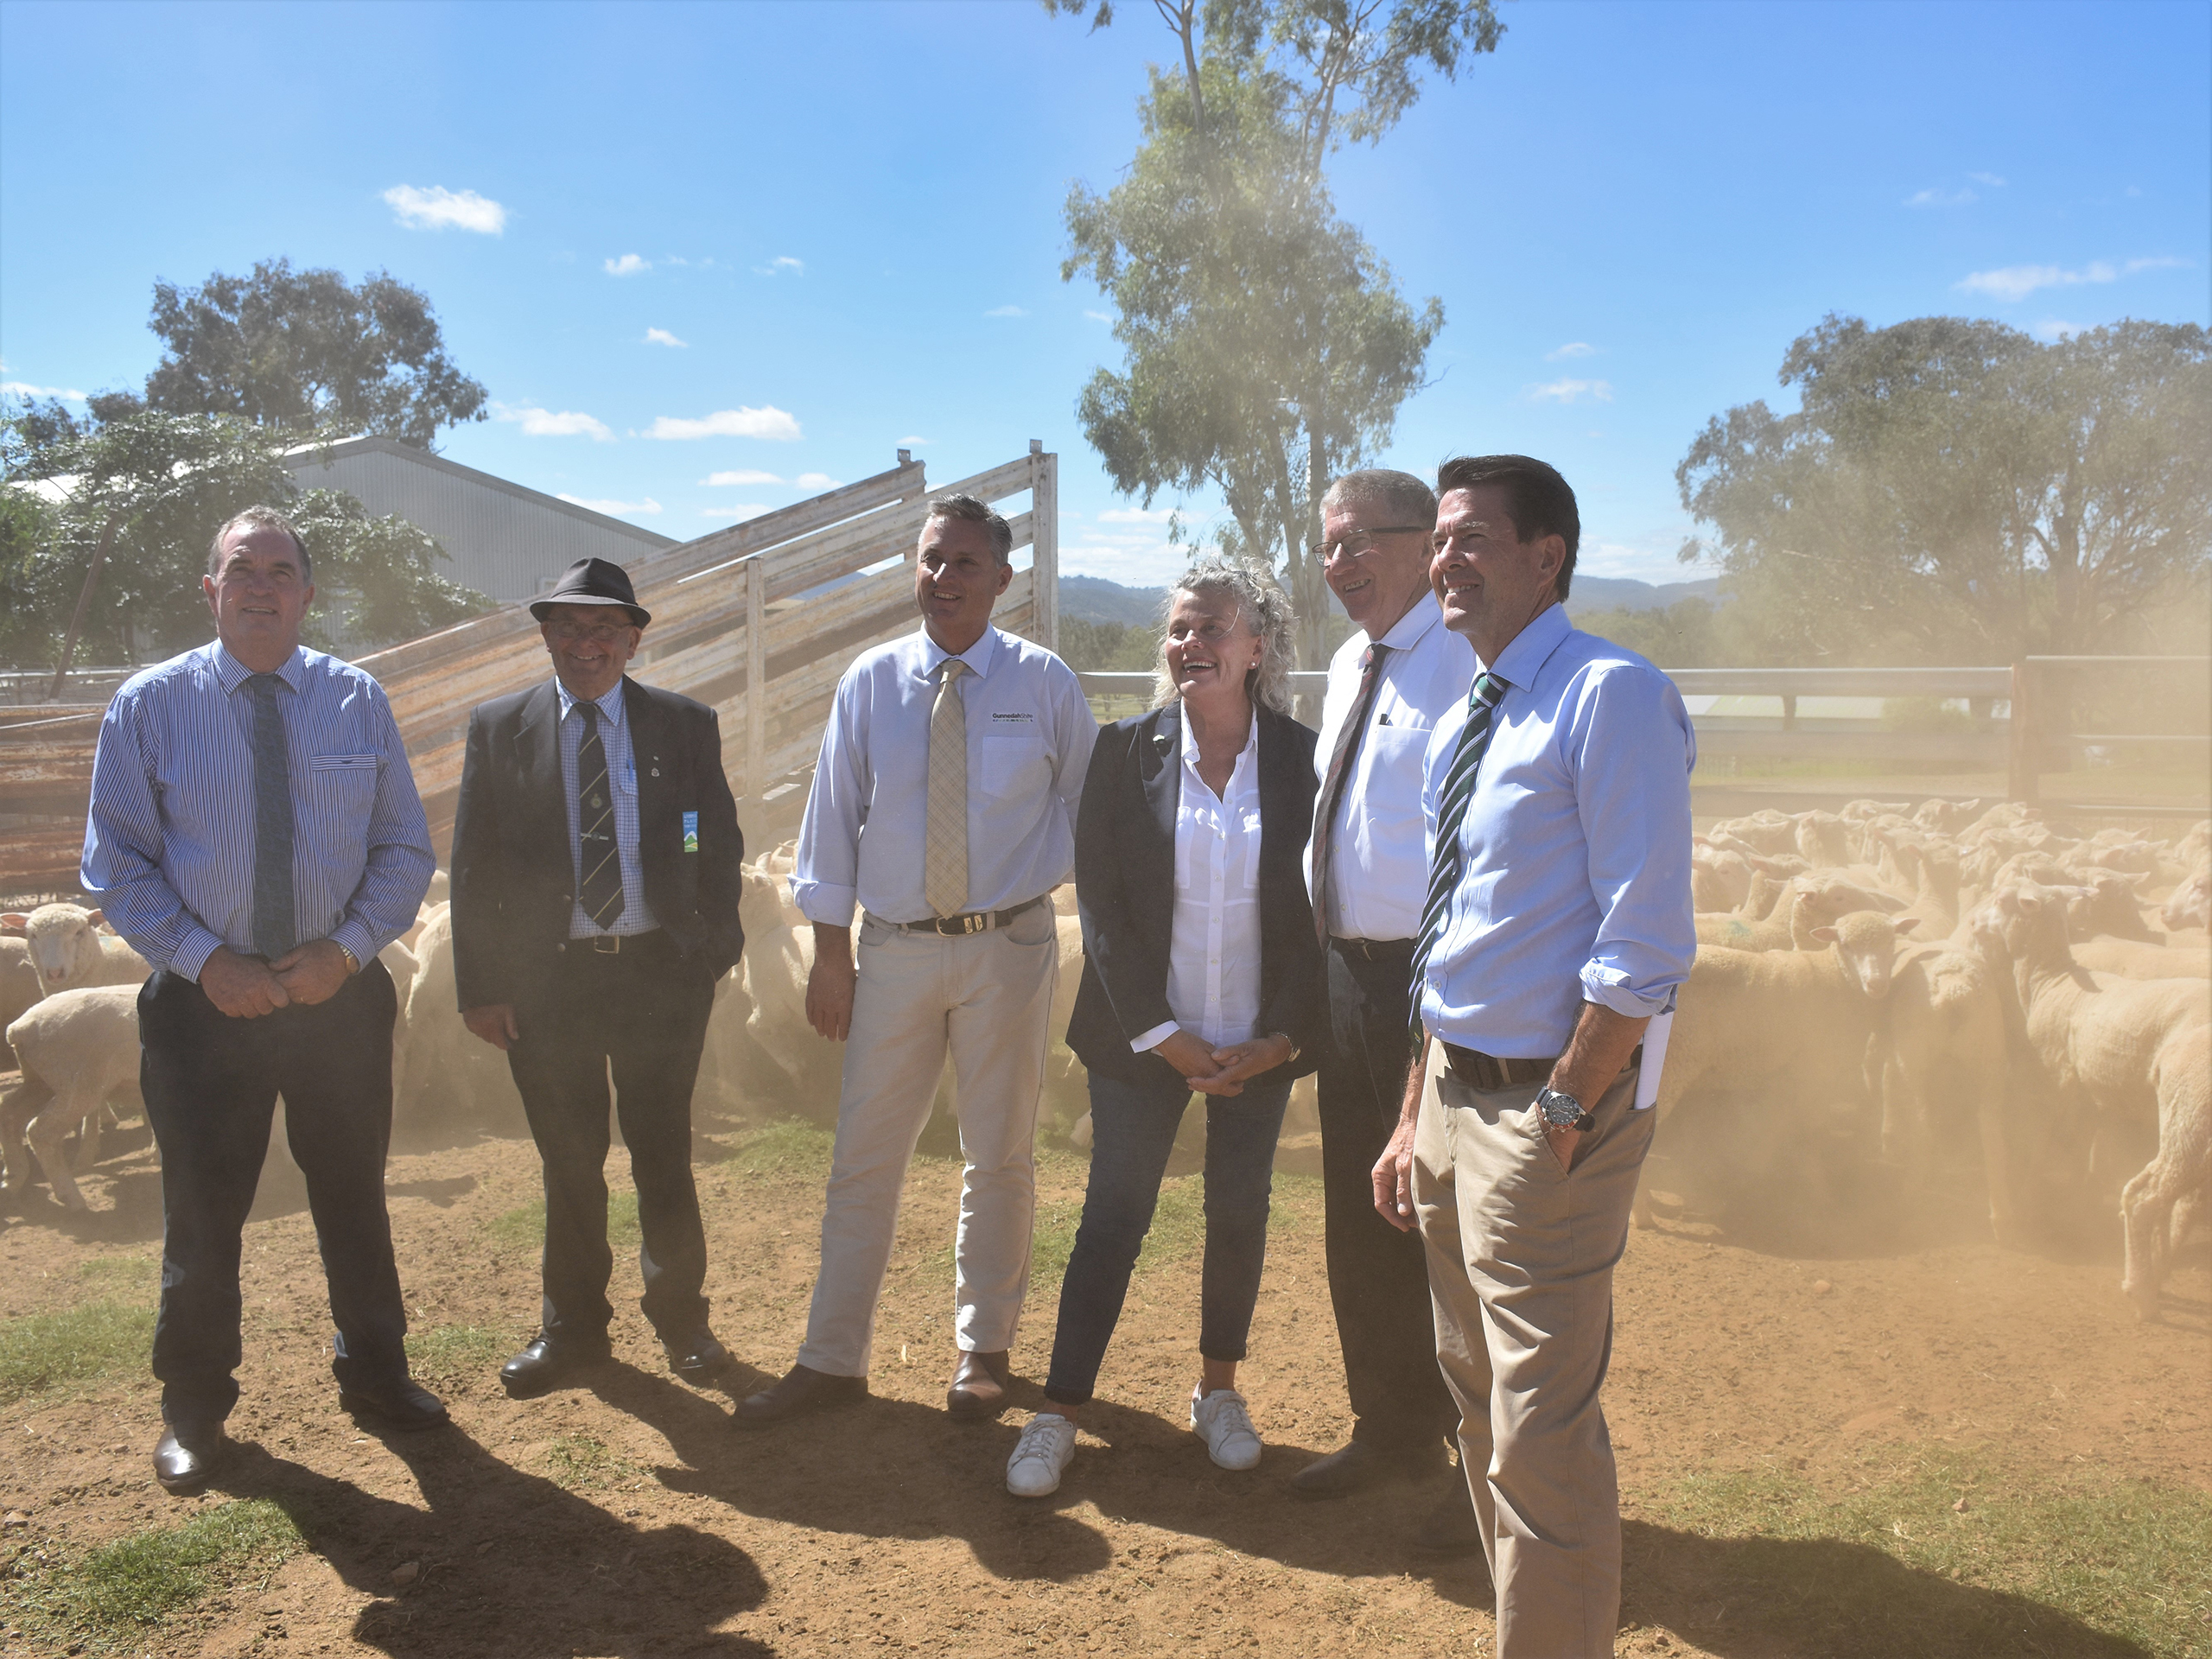 It's official: NSW Minister for Better Regulation and Member for Tamworth Kevin Anderson has announced that the Namoi region will be the state’s fourth Regional Jobs Precinct. The CRC will work with the Namoi Joint Organisation, NSW Government, UNSW and UNE to help plan the new precinct.